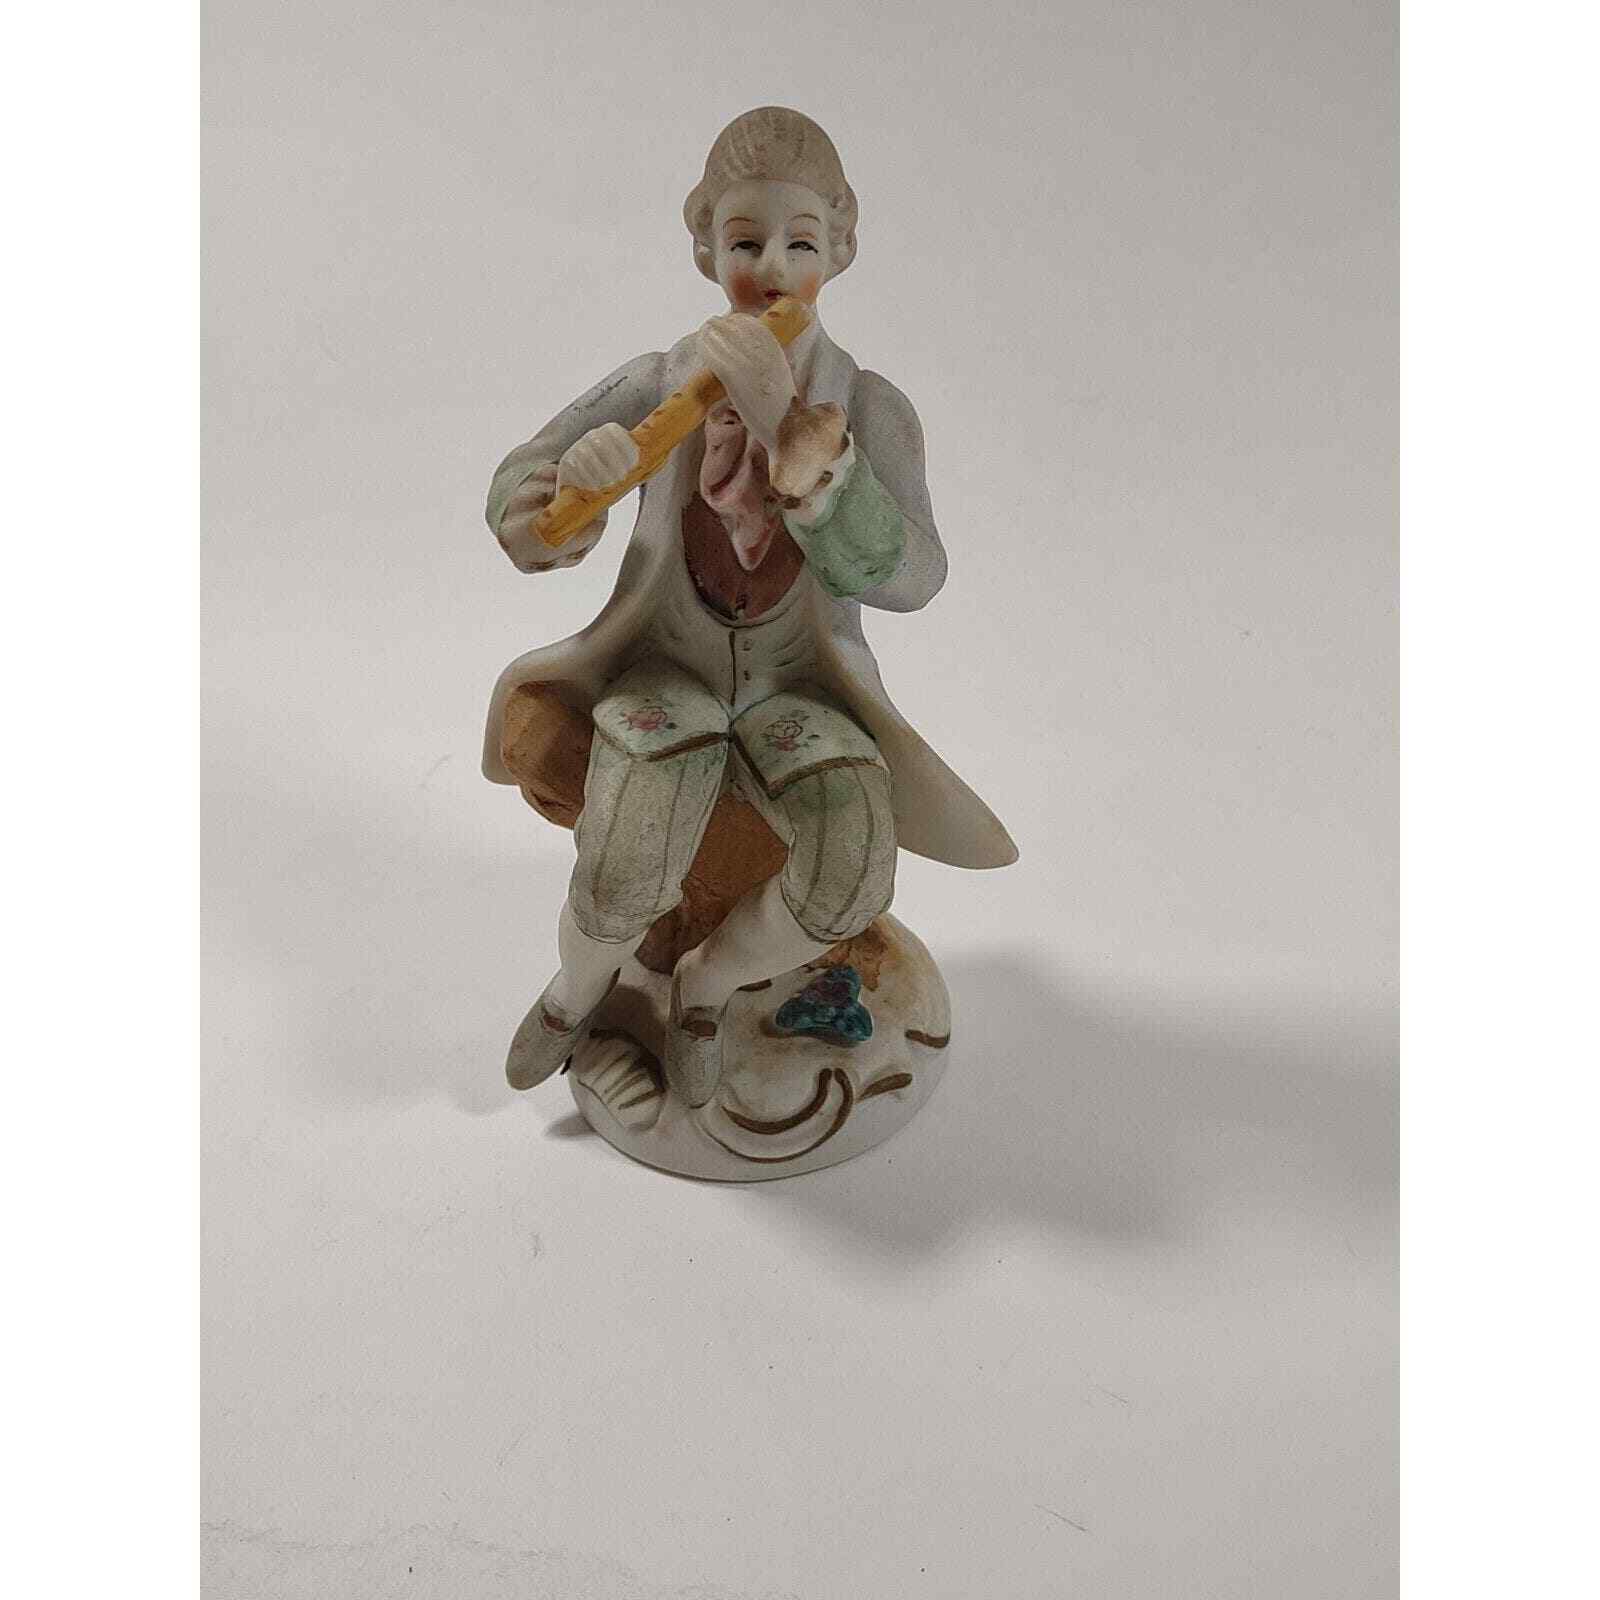 Vintage Colonial Seated Man Figurine Playing Flute Made In Occupied Japan